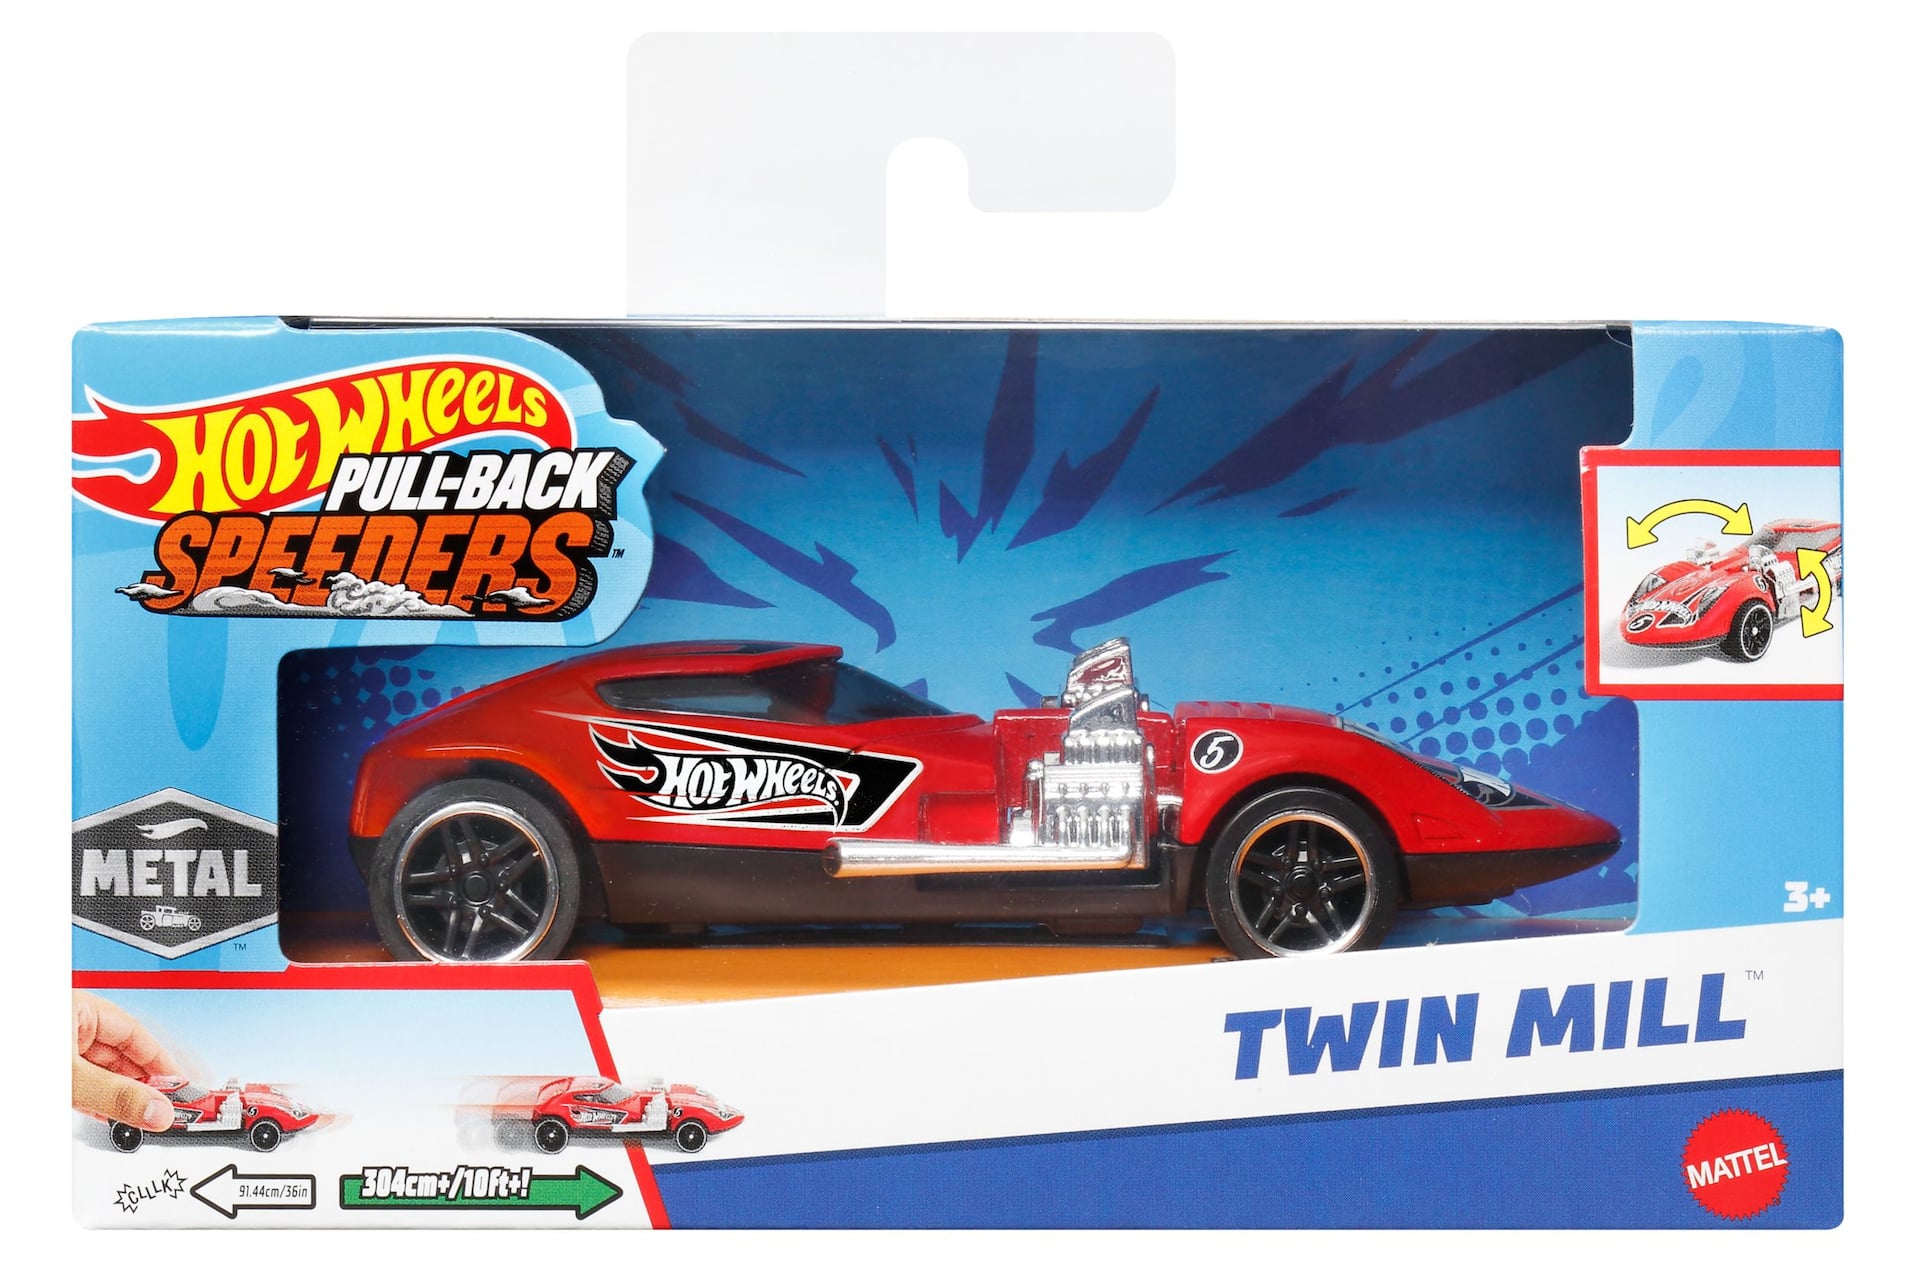 Hot Wheels® Pull-Back Speeders Collectible Cars, Assorted Styles